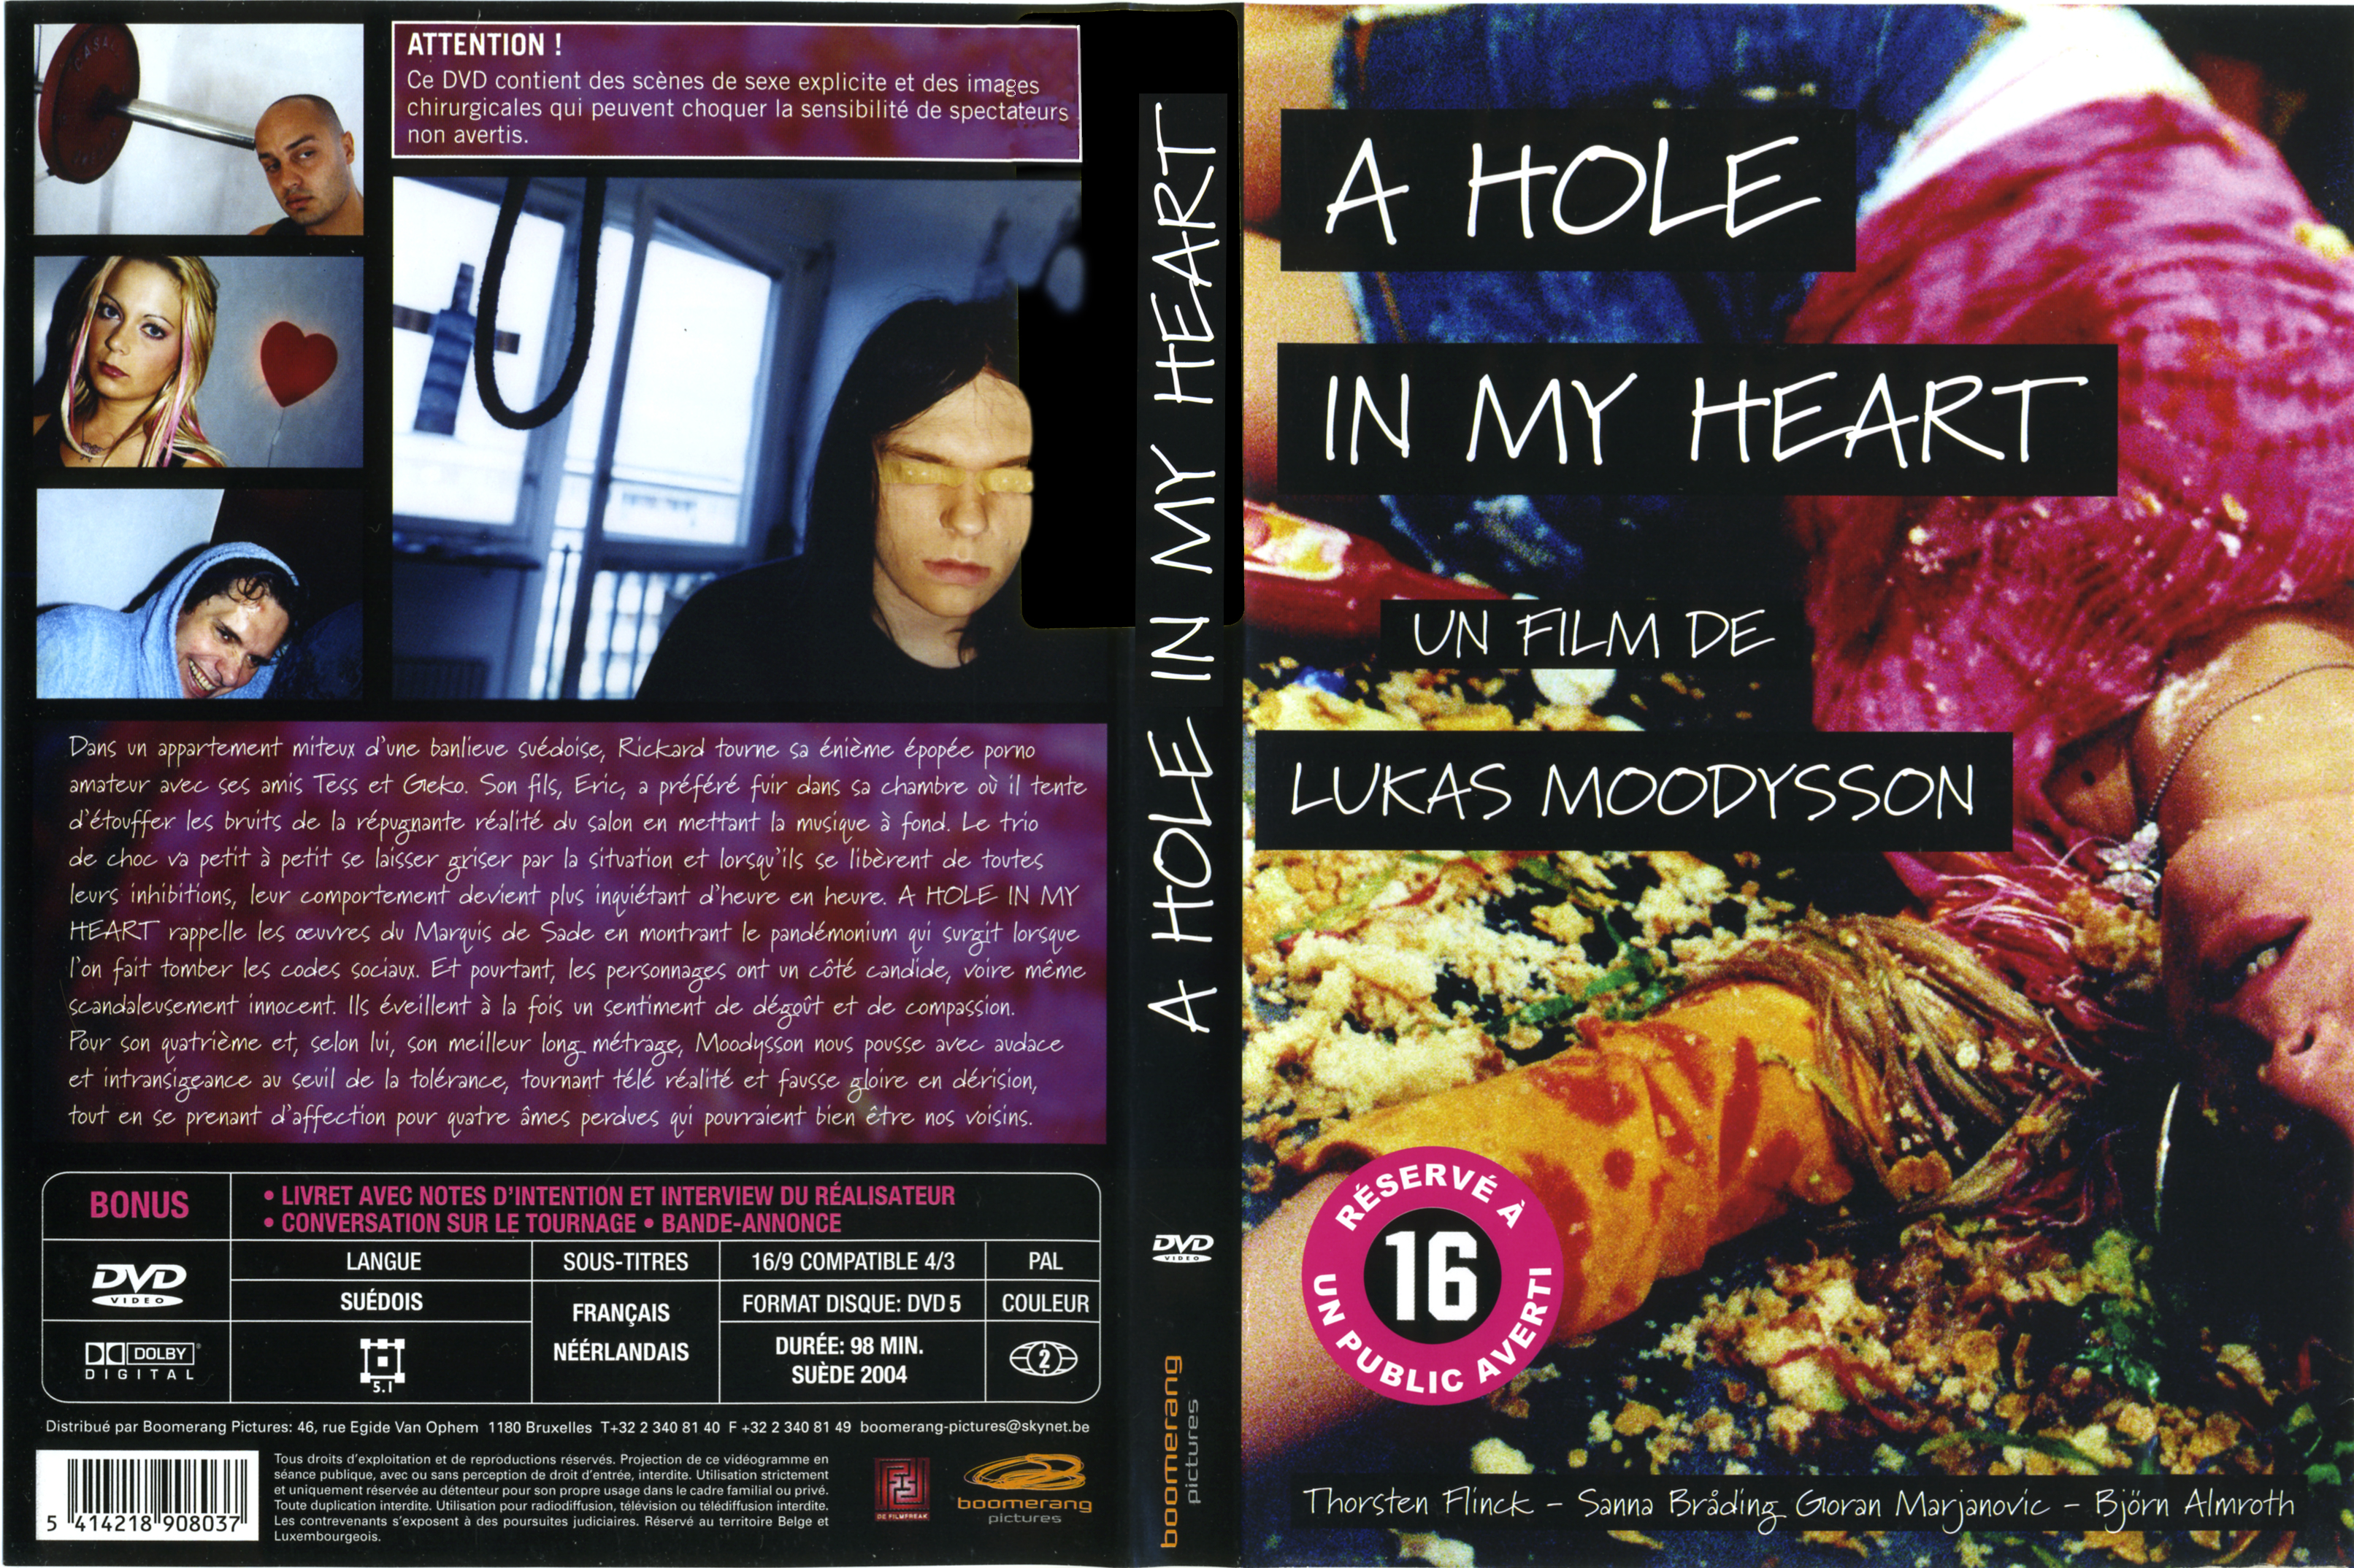 Jaquette DVD A hole in my heart